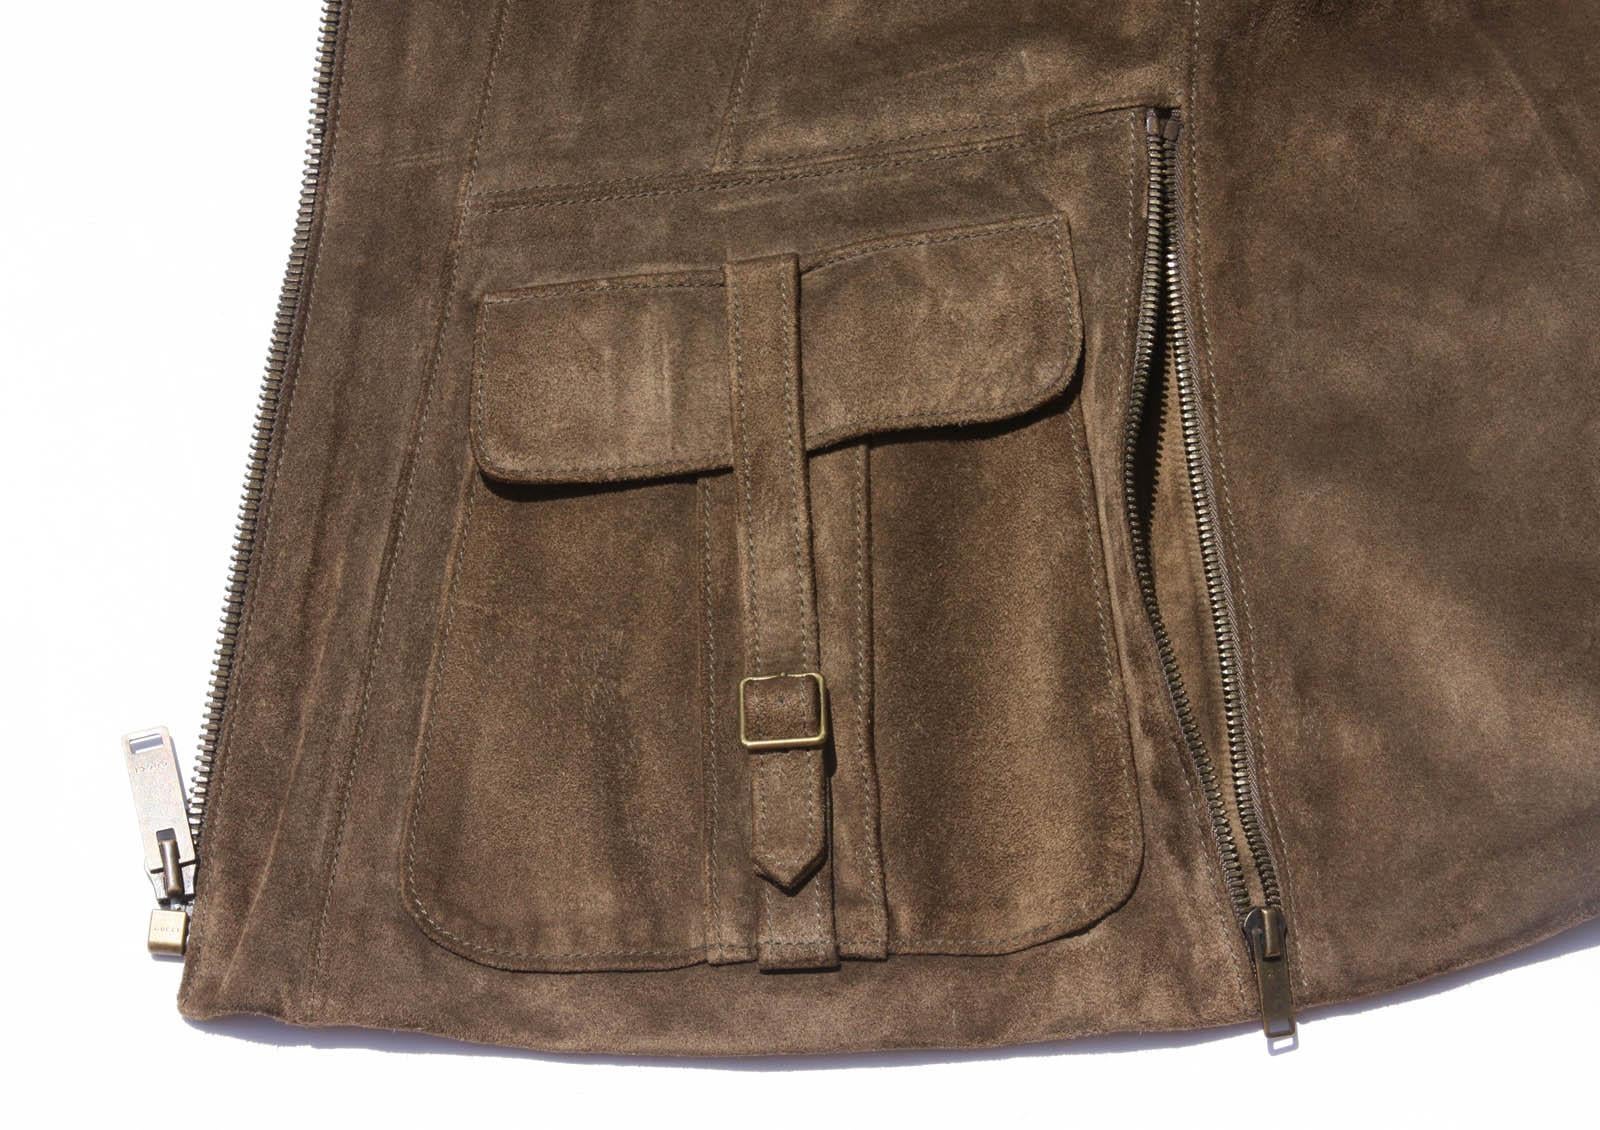 Tom Ford for Gucci Men's Runway Leather Western Jacket, S / S 2004  1